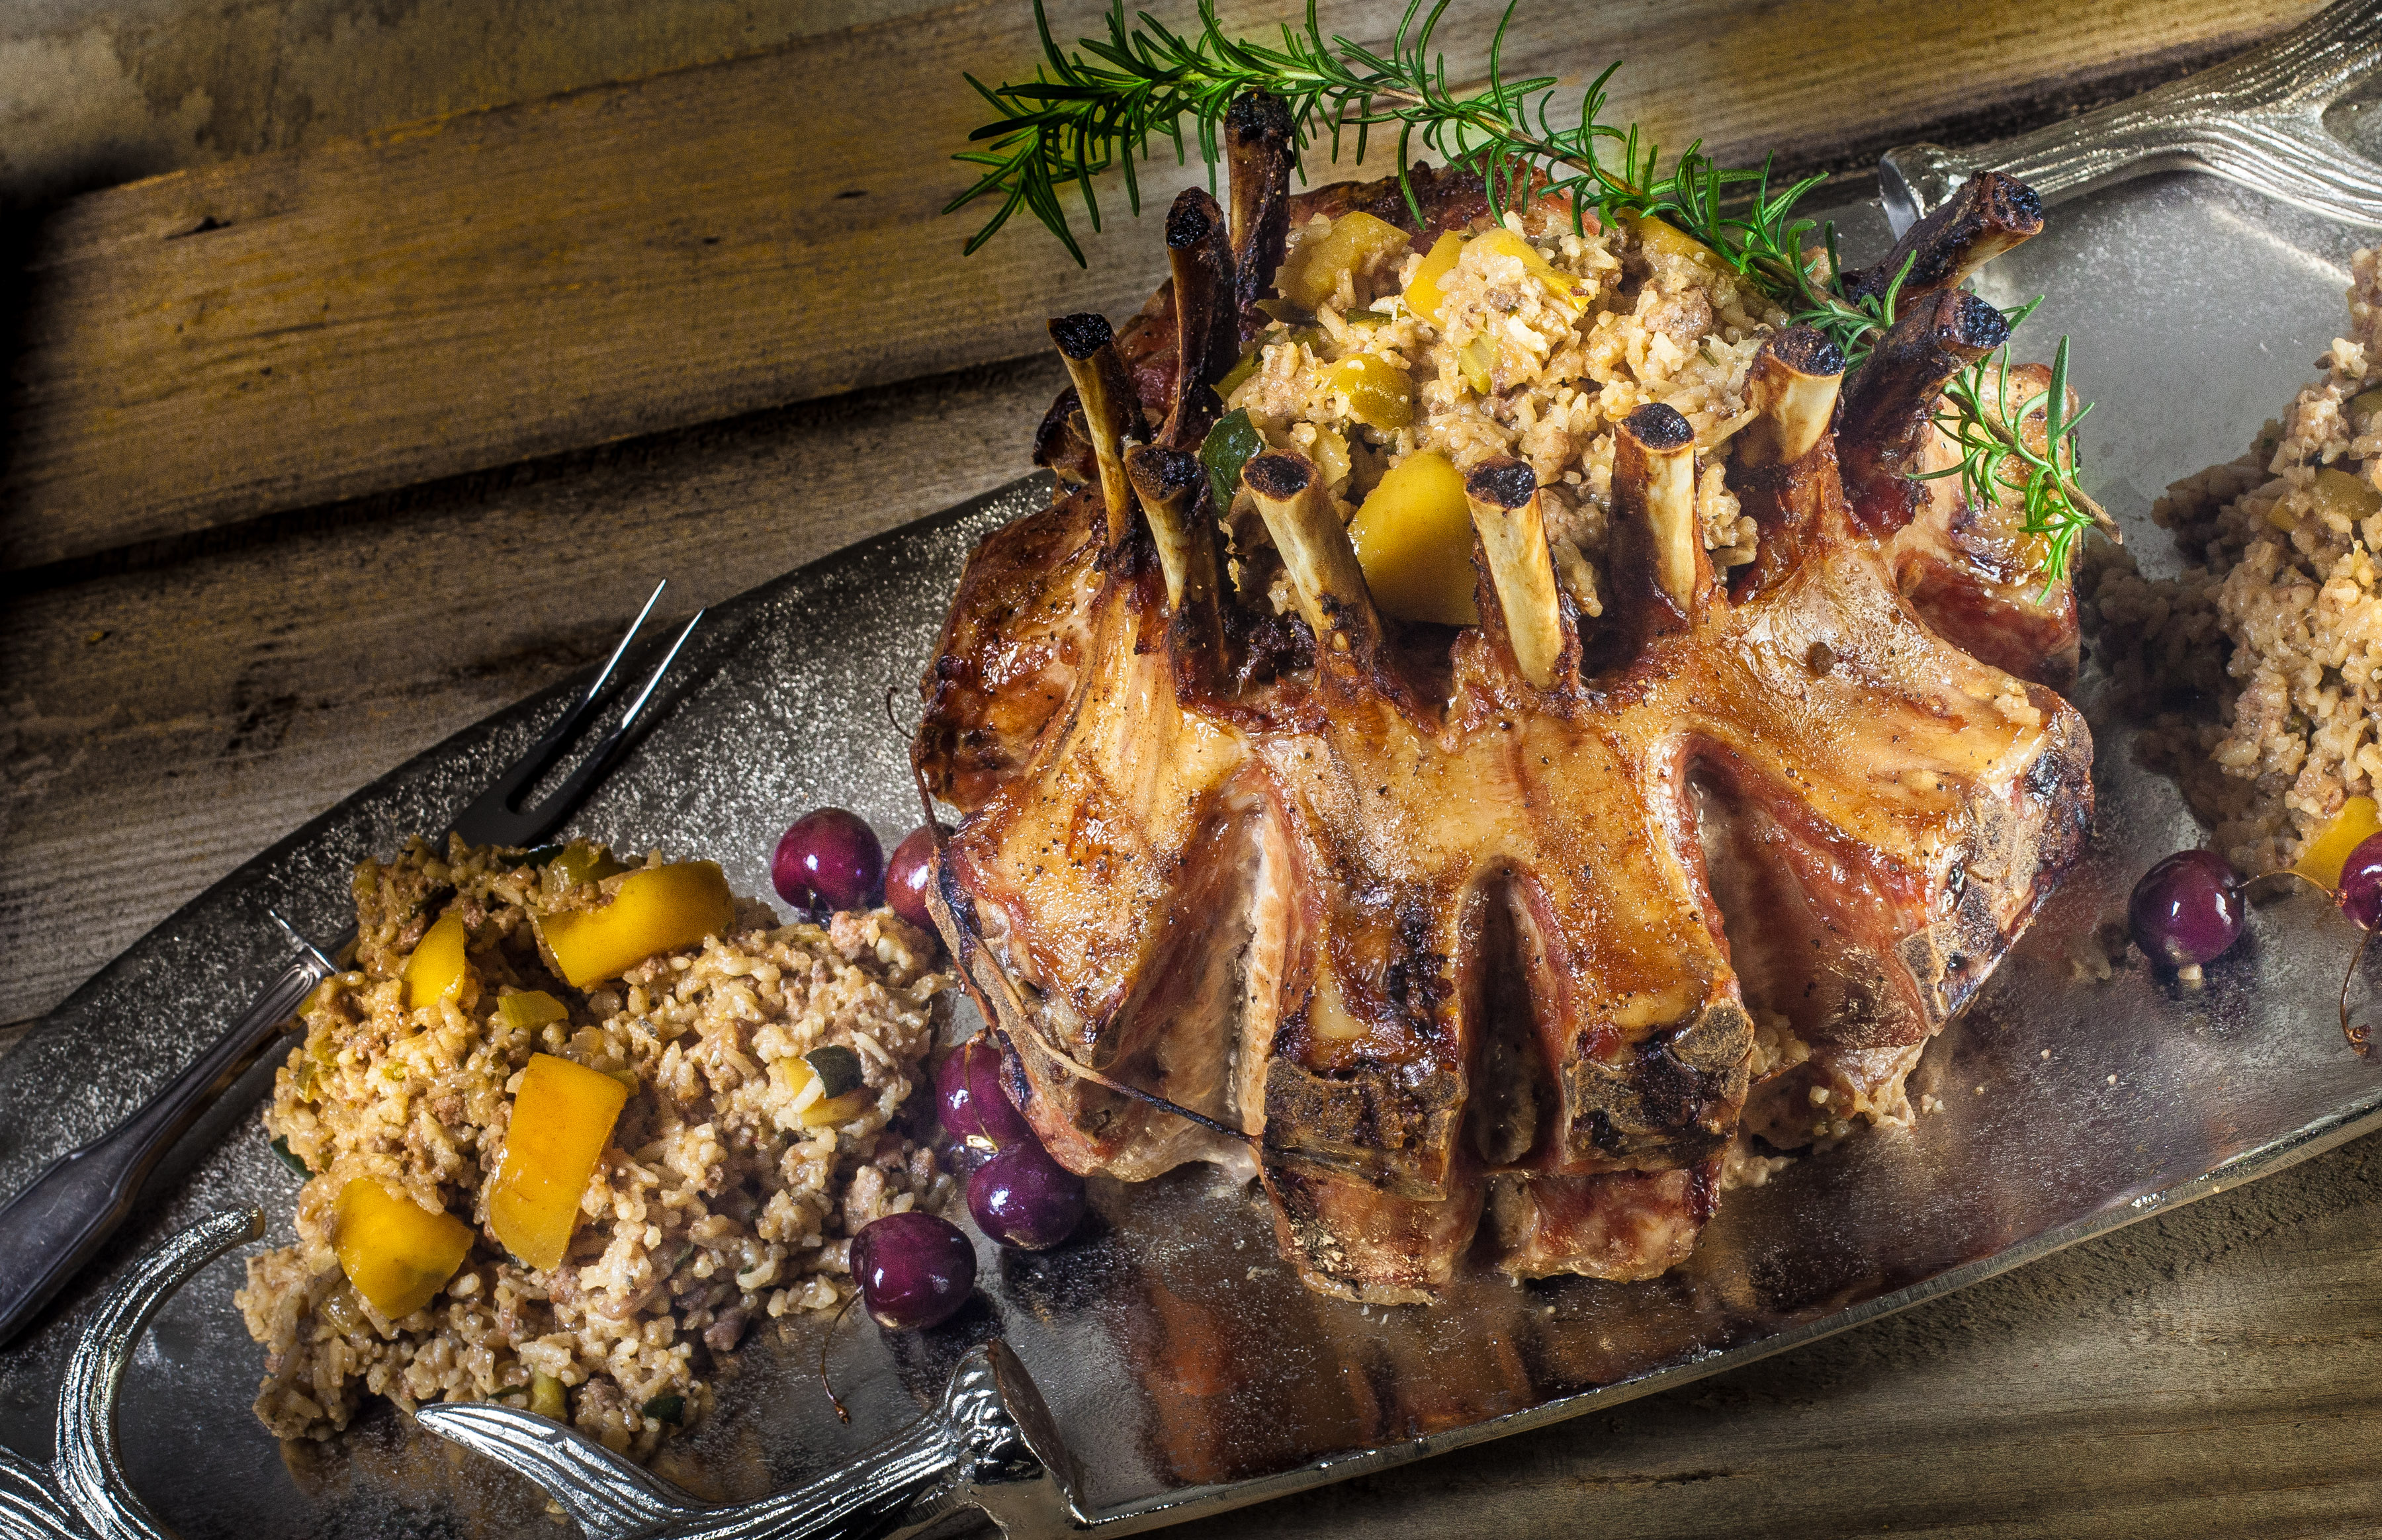 Crown Roast of Pork is a delicious holiday dinner idea.